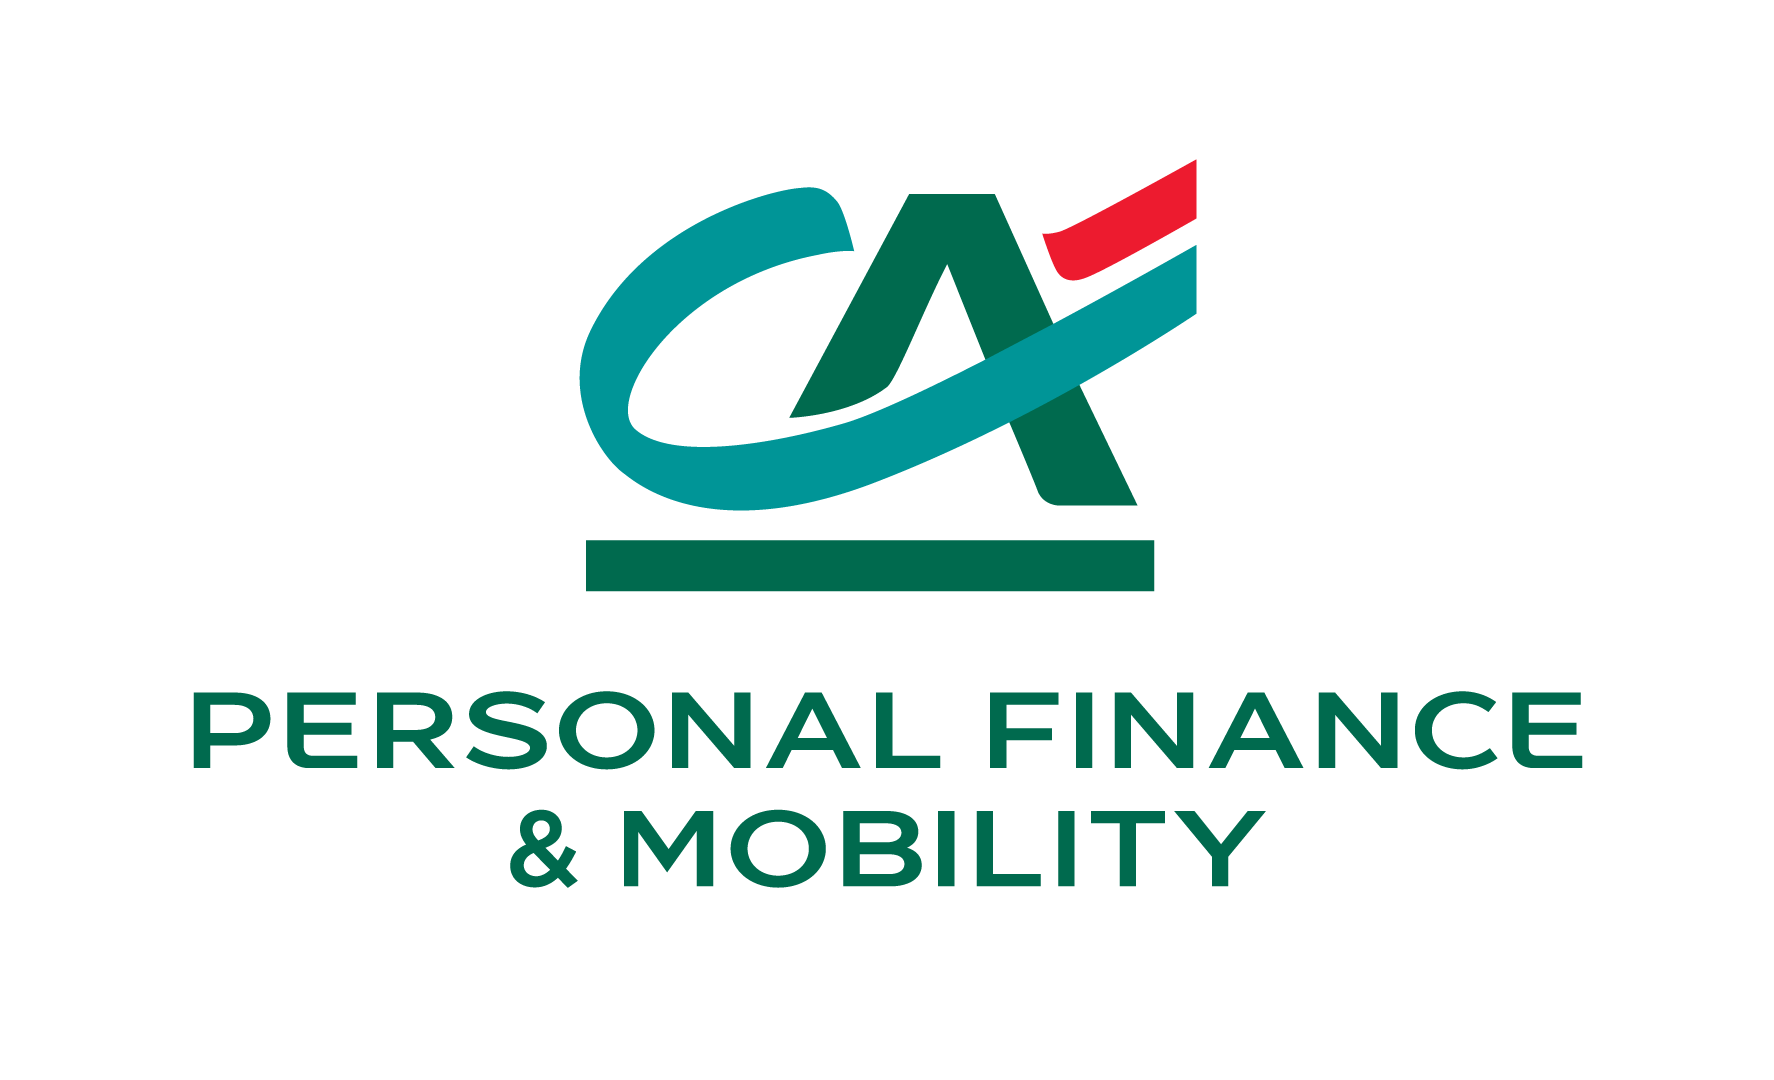 Credit Agricole Personal Finance & Mobility - CRG